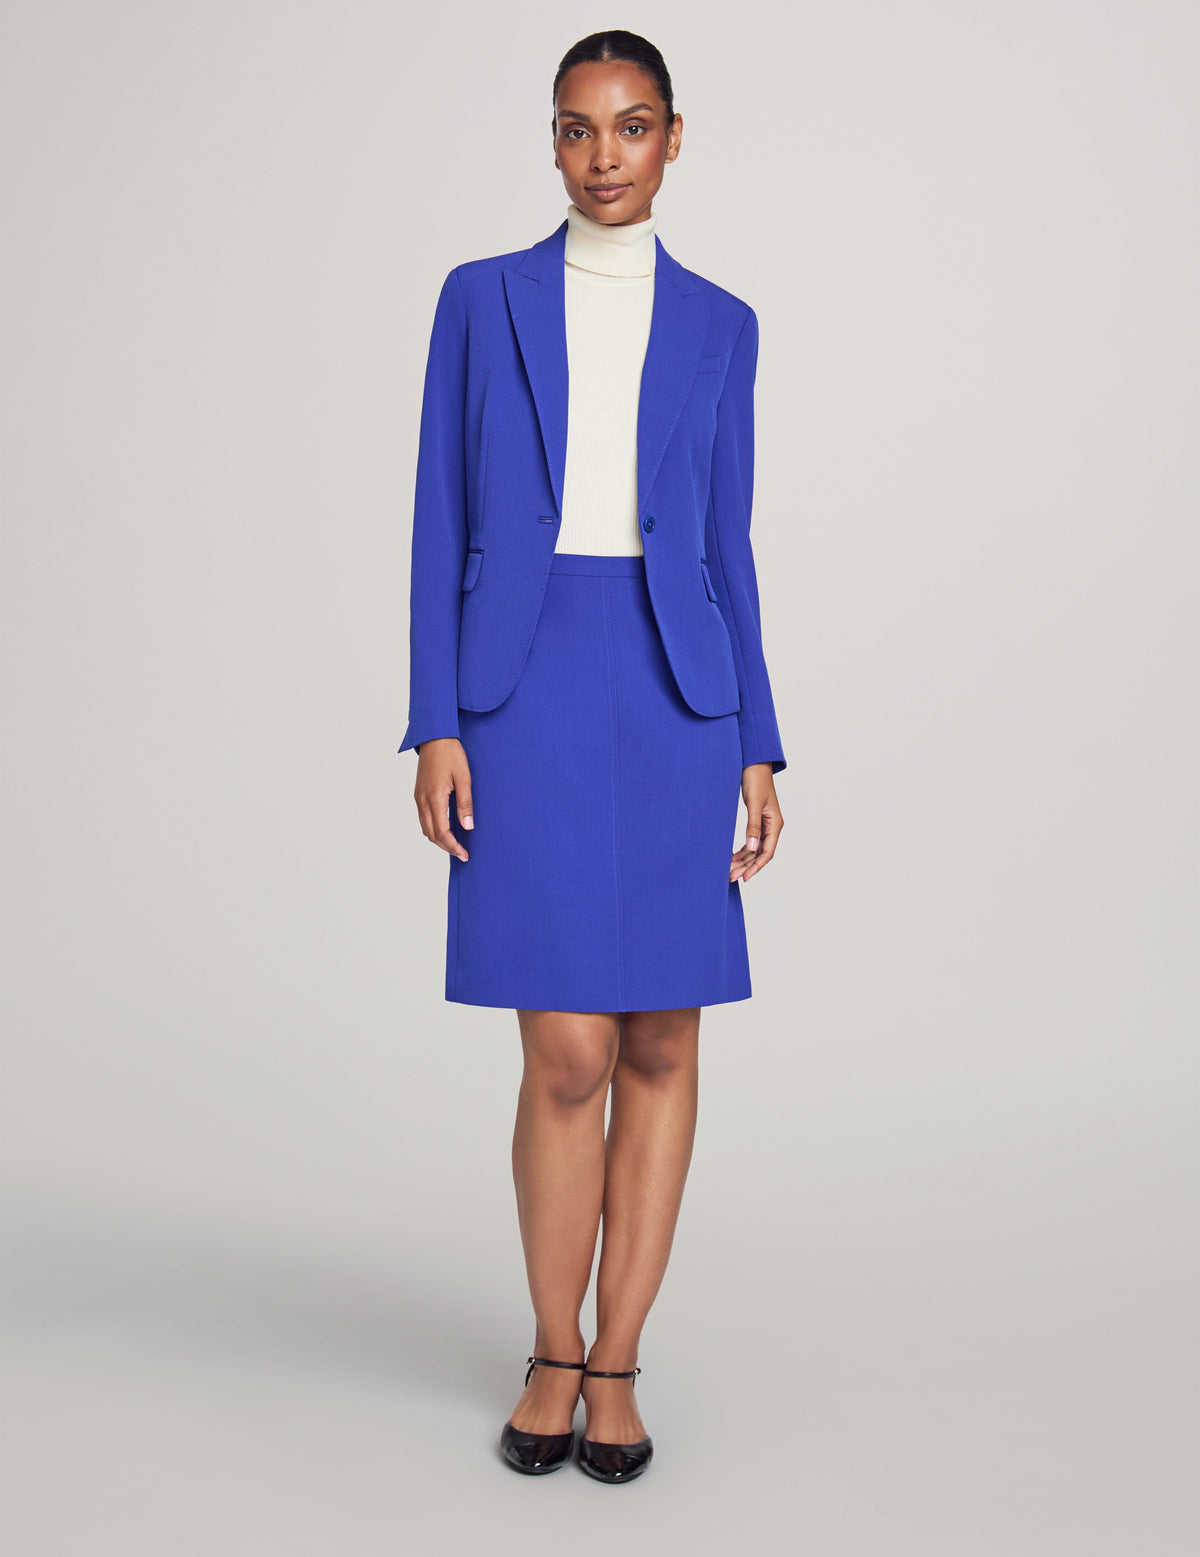 Anne Klein Royal Sapphire Executive Collection Jacket and Skirt Suit Set